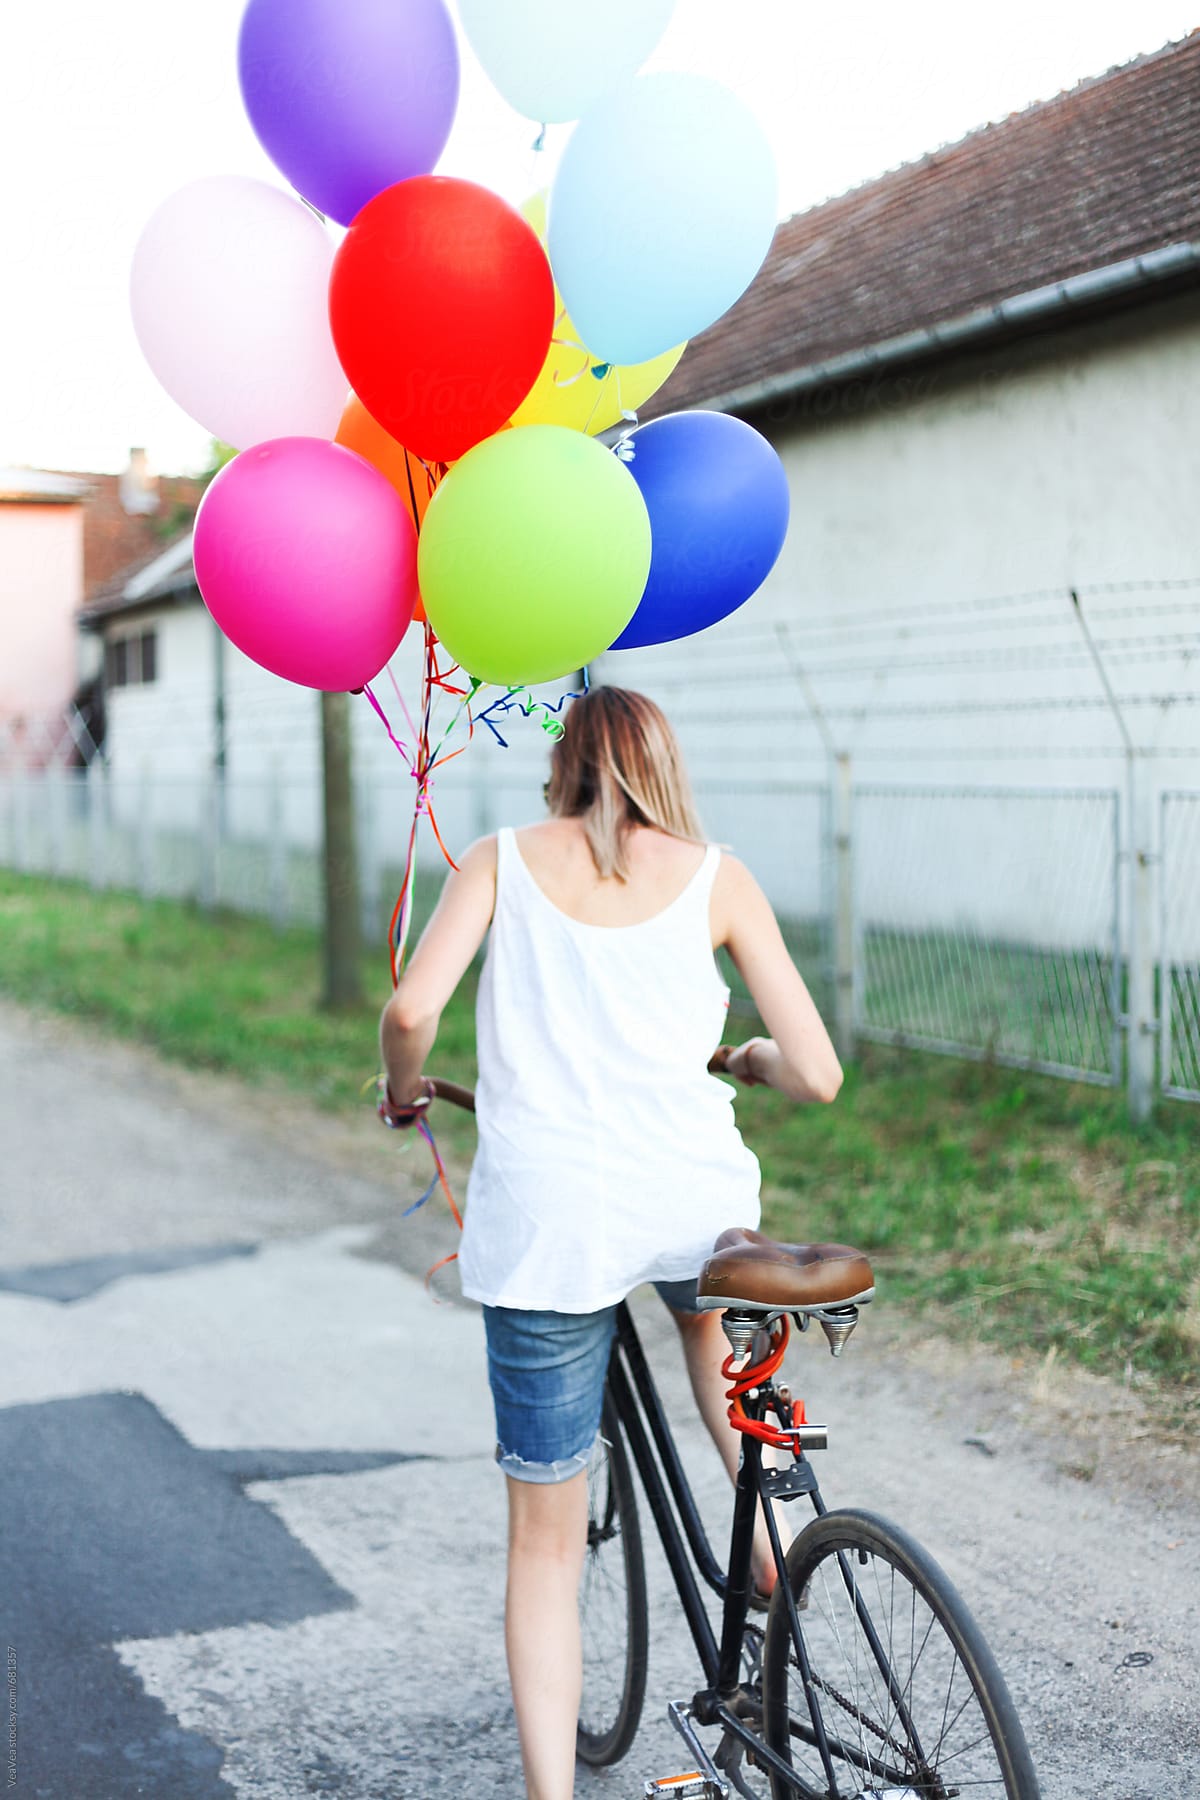 Woman riding a bicycle with colorful ballons